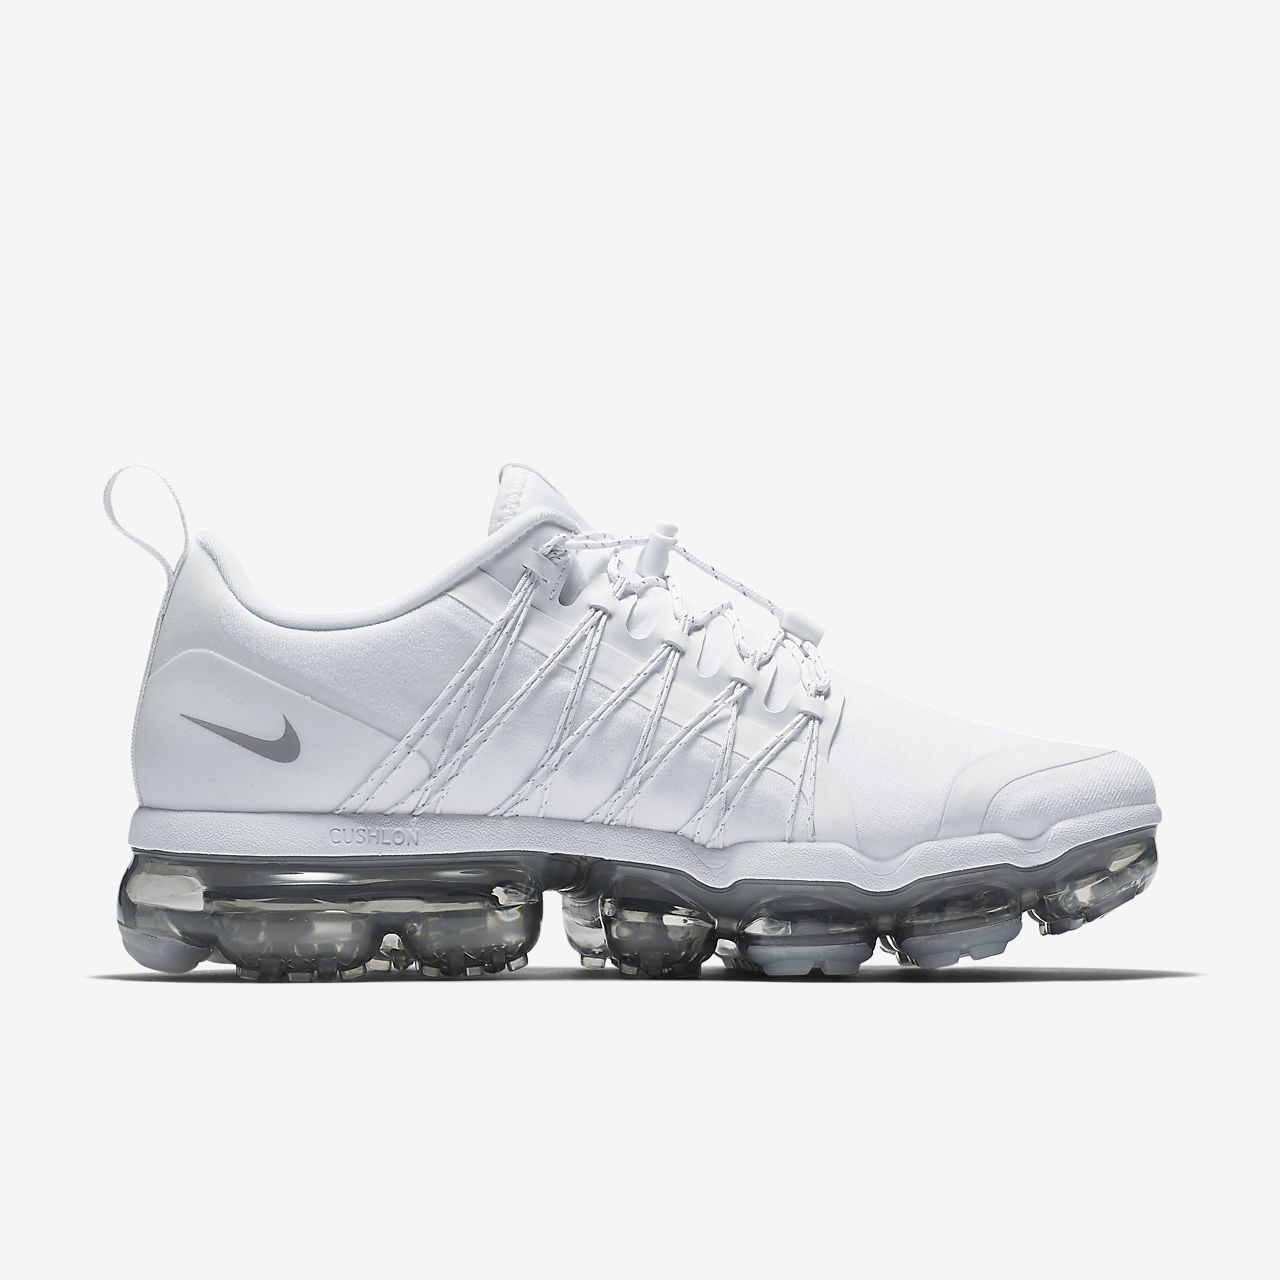 Egypt Many chilly Nike Air Vapormax Run Utility Women's Top Sellers, 52% OFF |  www.colegiogamarra.com